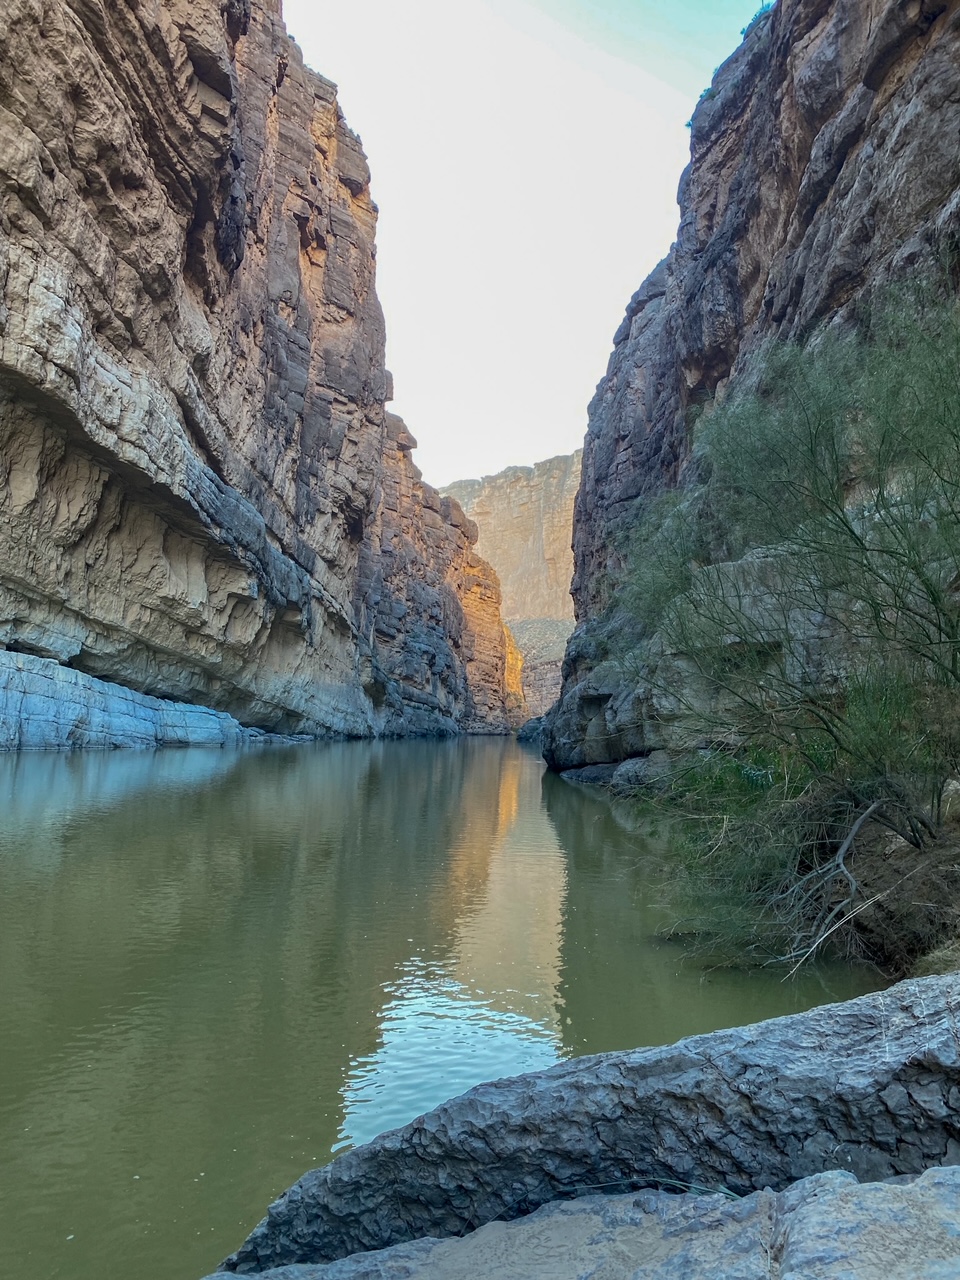 the Santa Elena Canyon trail ends at a lovely view of the canyon and the Rio Grande